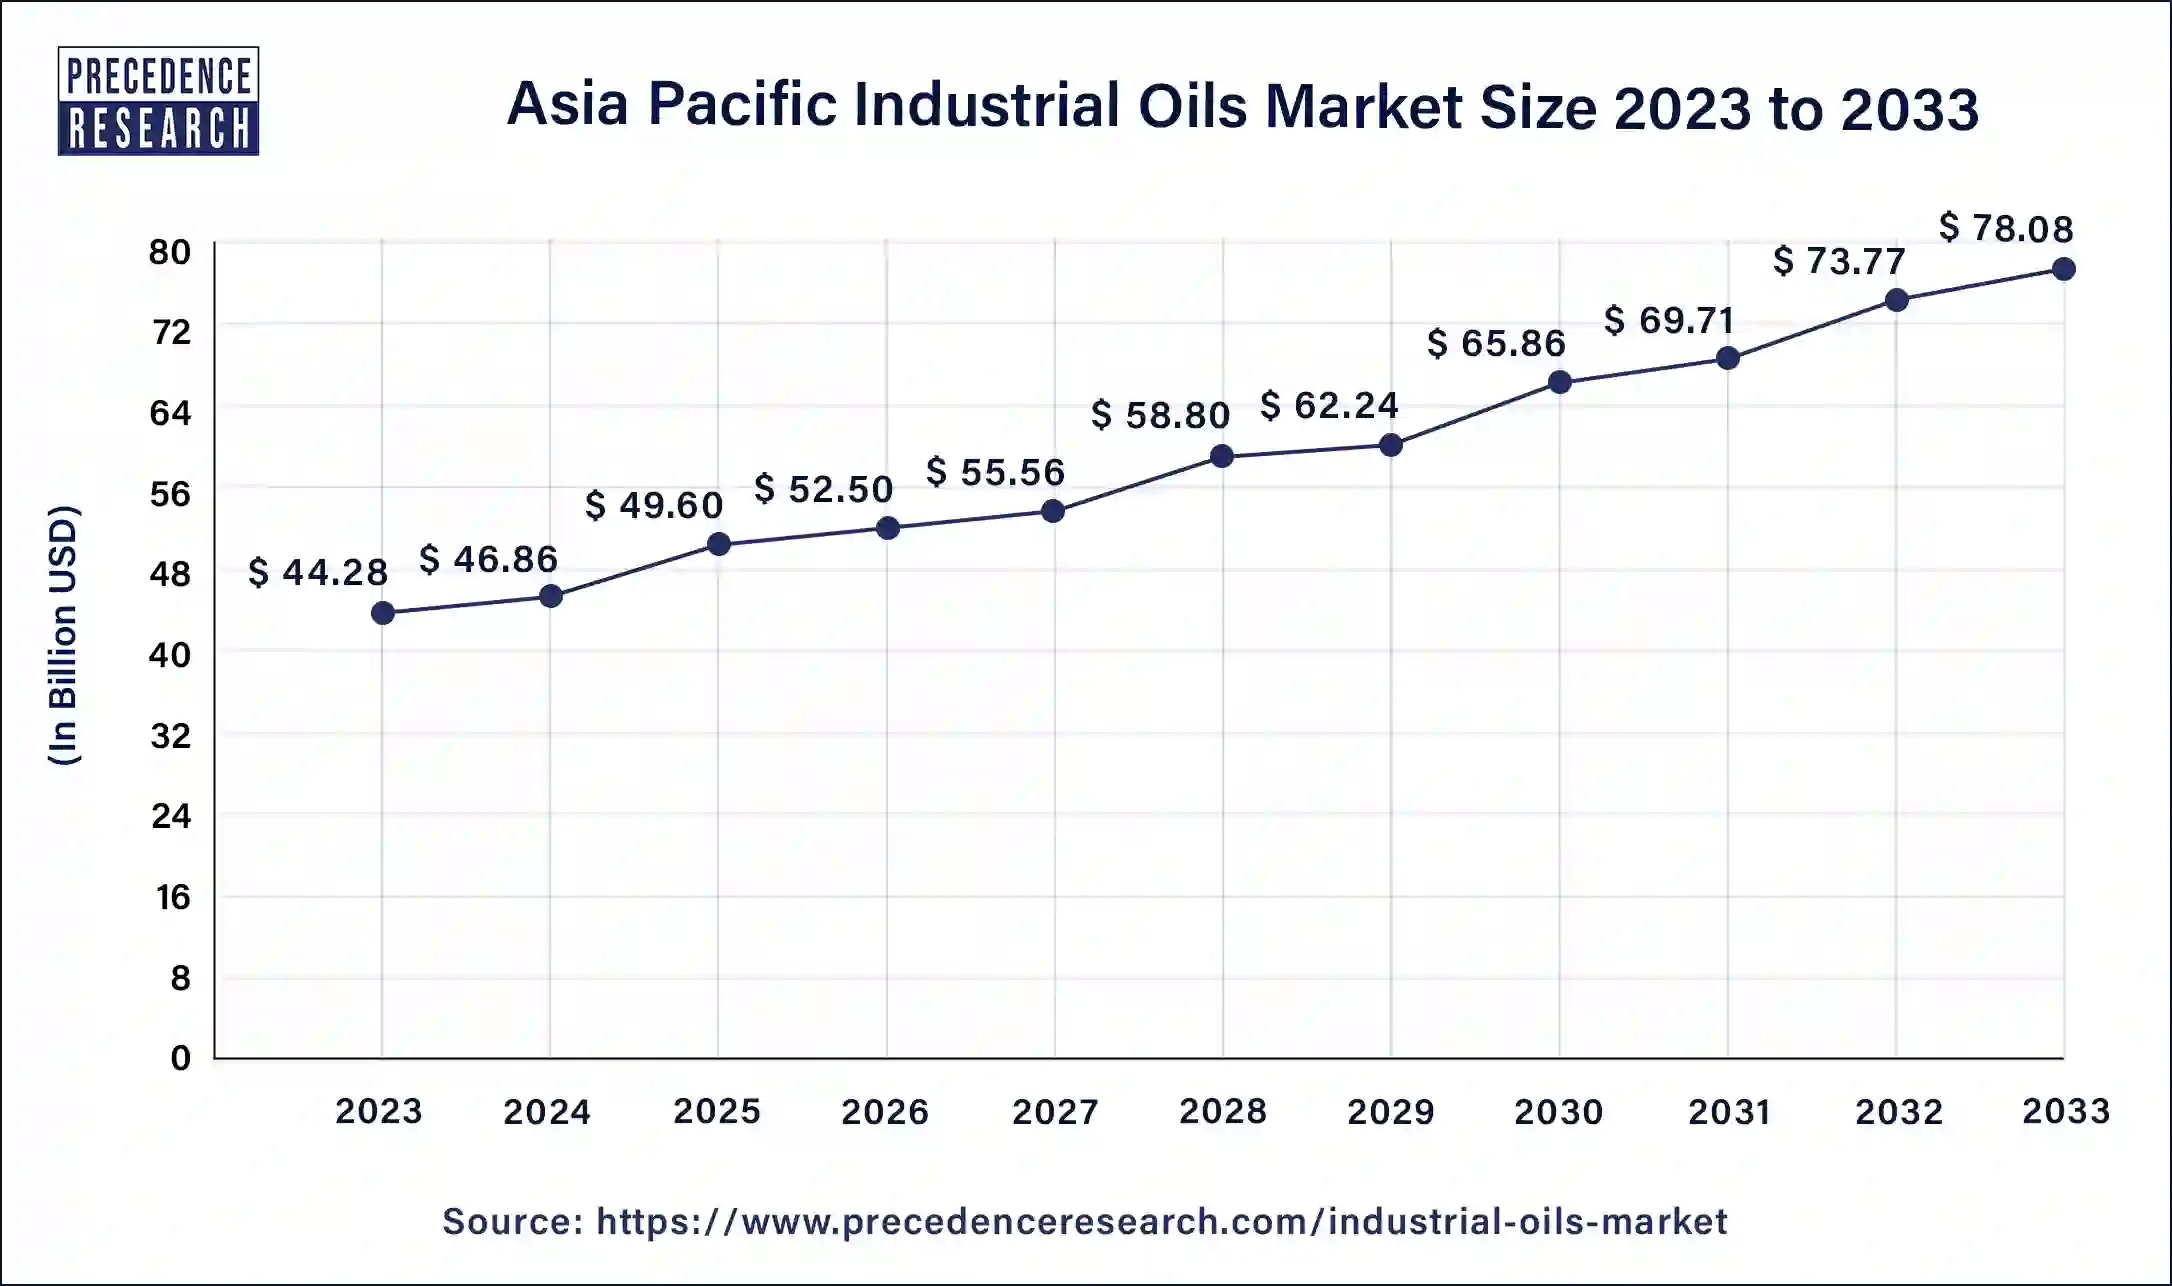 Asia Pacific Industrial Oils Market Size 2024 to 2033